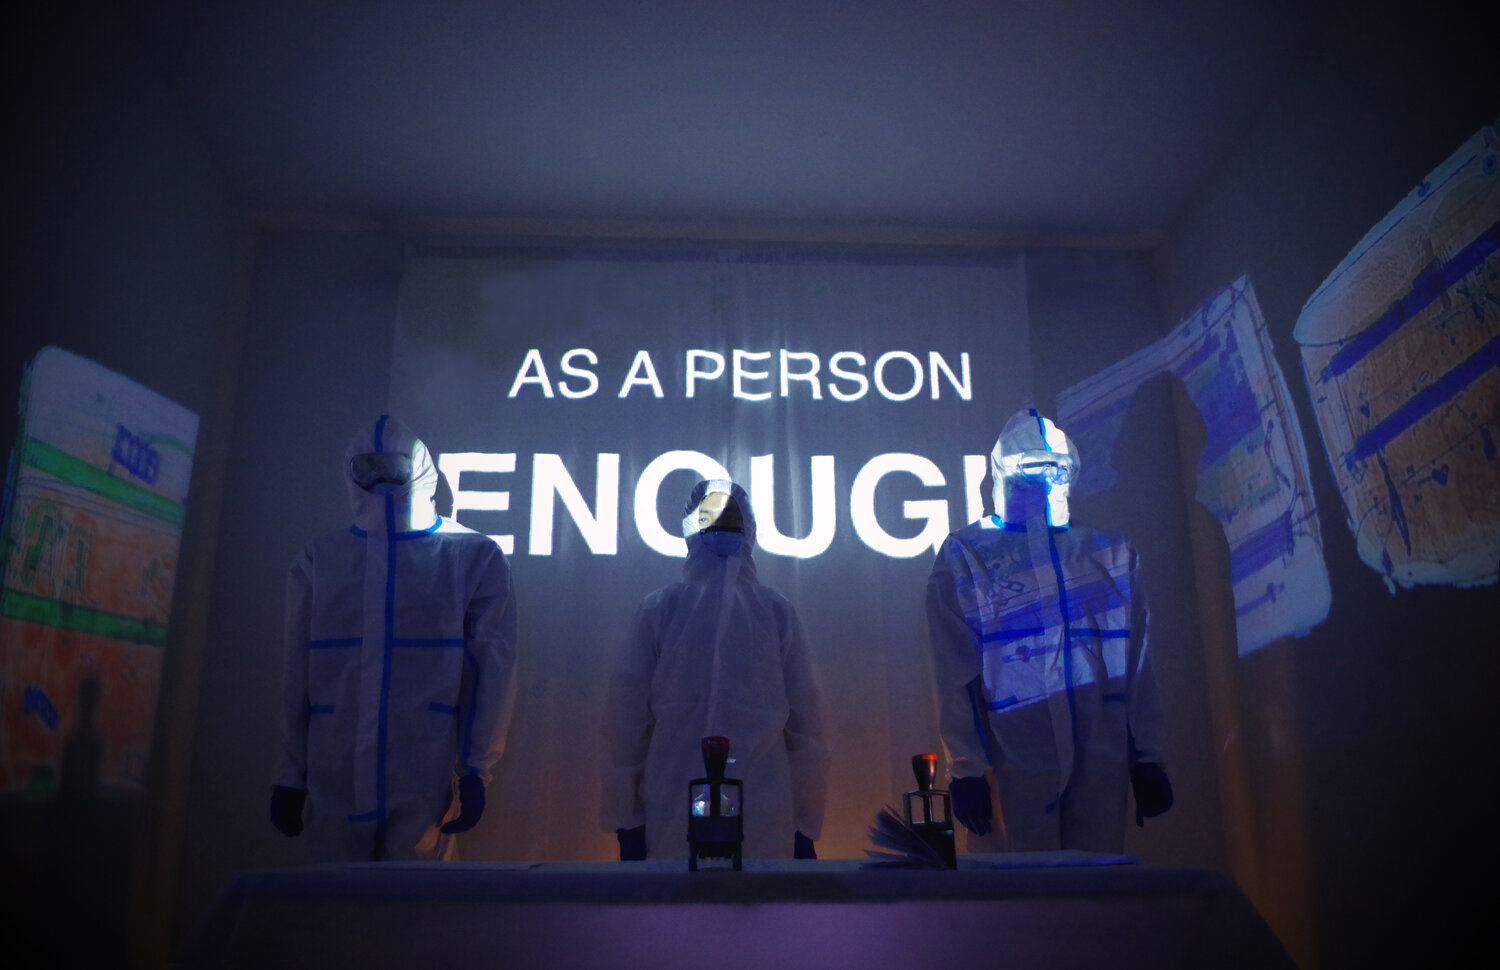 Three people wearing tyvek suits stand behind a table in a dark room lit by wall projections. On the table are two passport hand stamps. The words, "AS A PERSON ENOUGH" are projected onto the back wall.